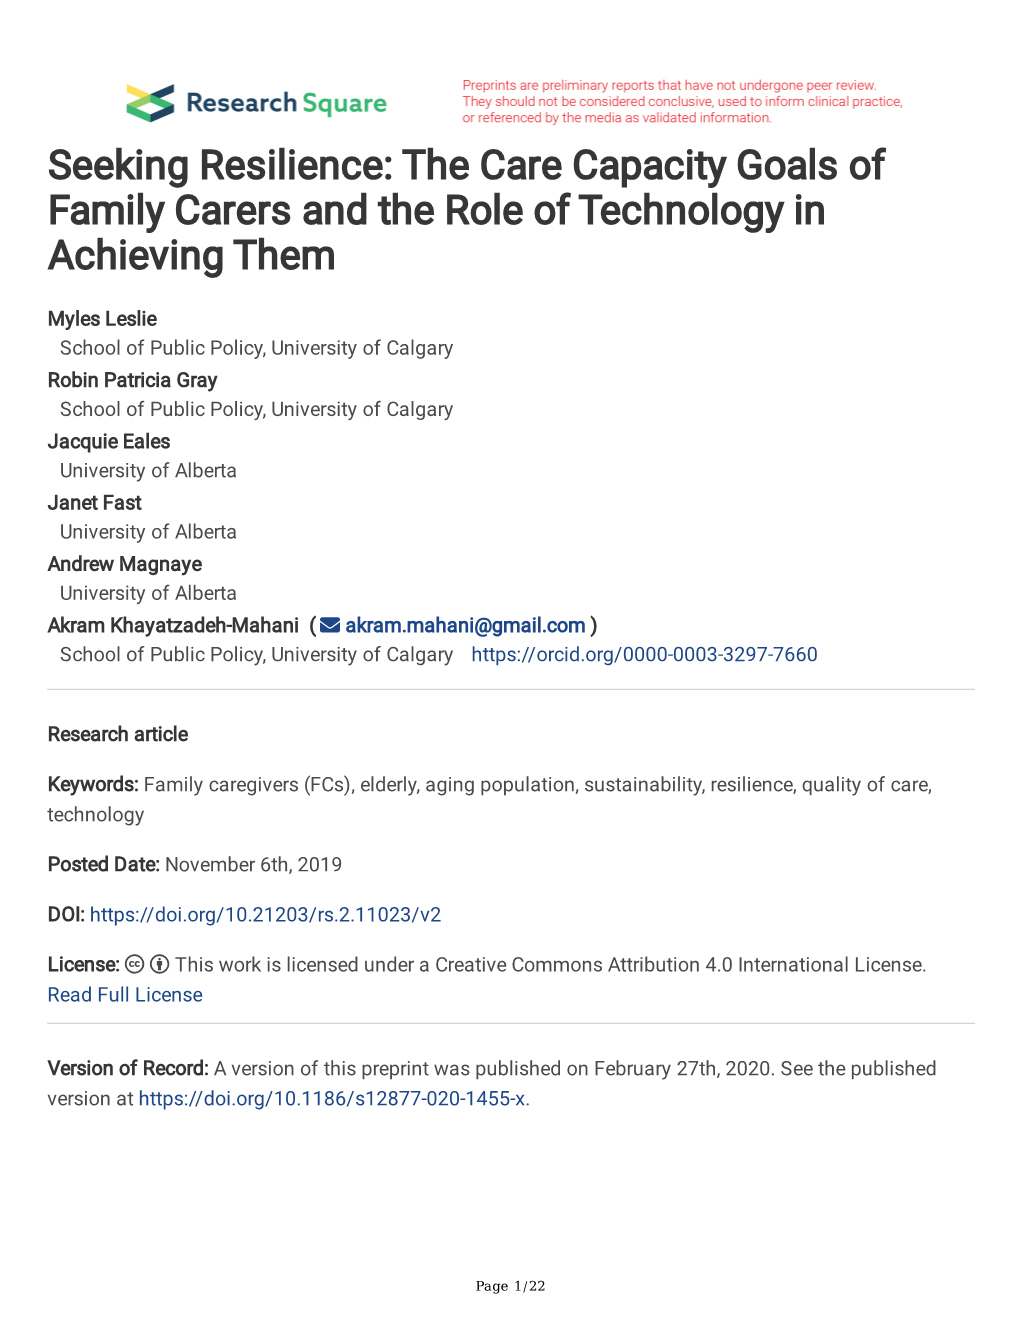 Seeking Resilience: the Care Capacity Goals of Family Carers and the Role of Technology in Achieving Them